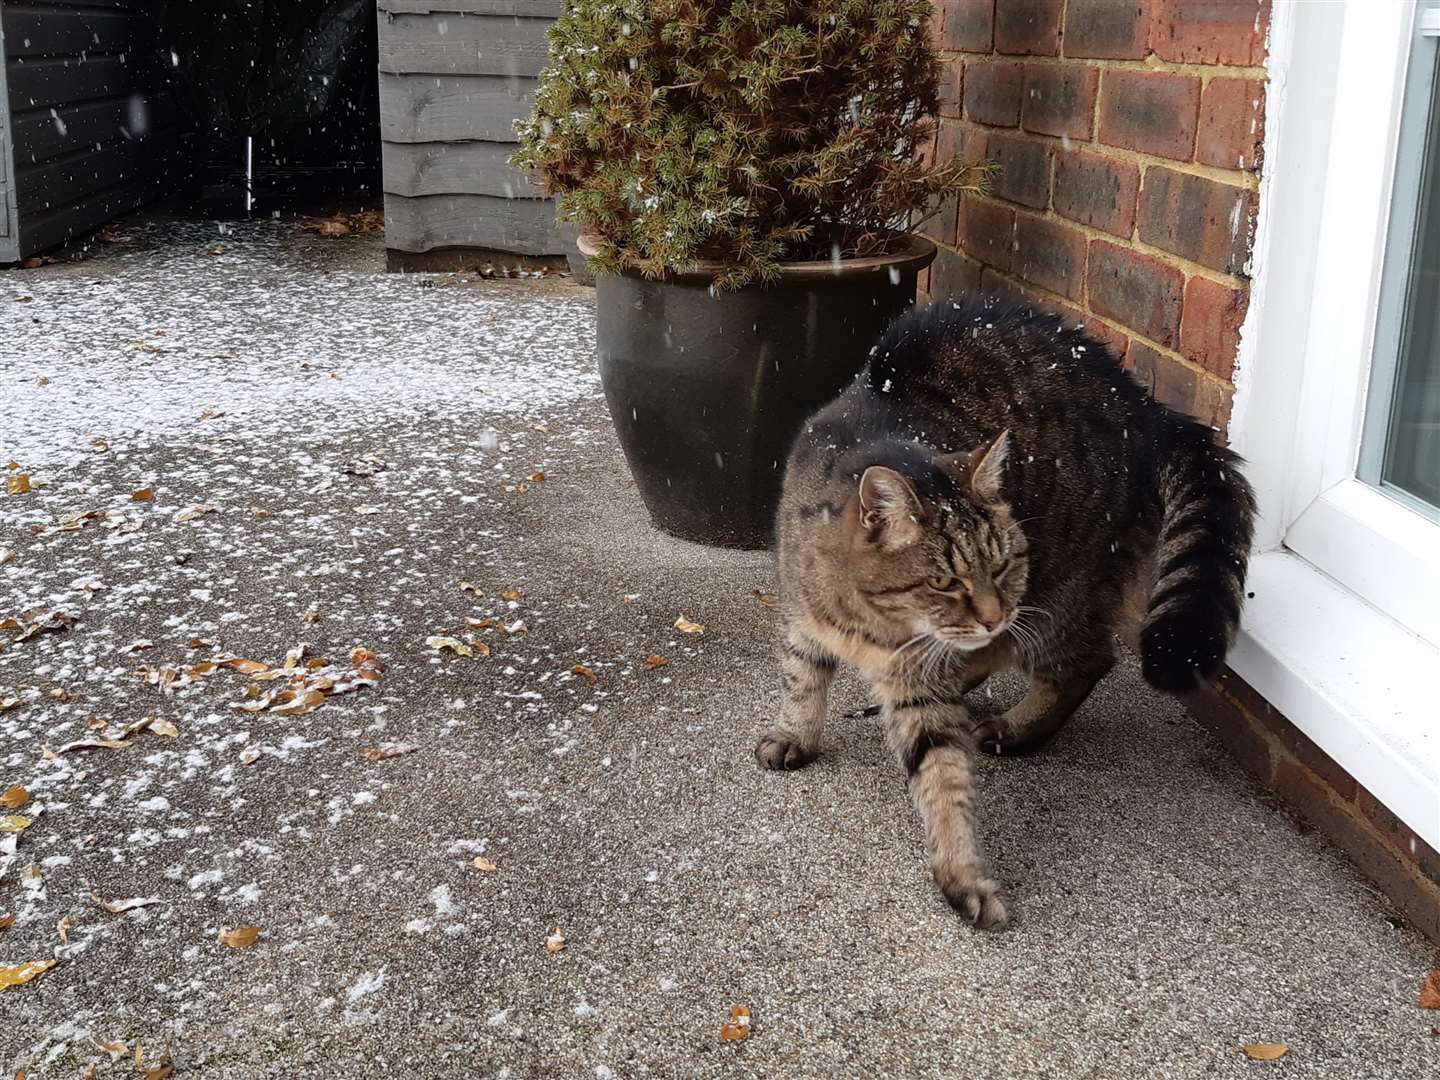 Cold paws for this little one in snowy Barming, near Maidstone